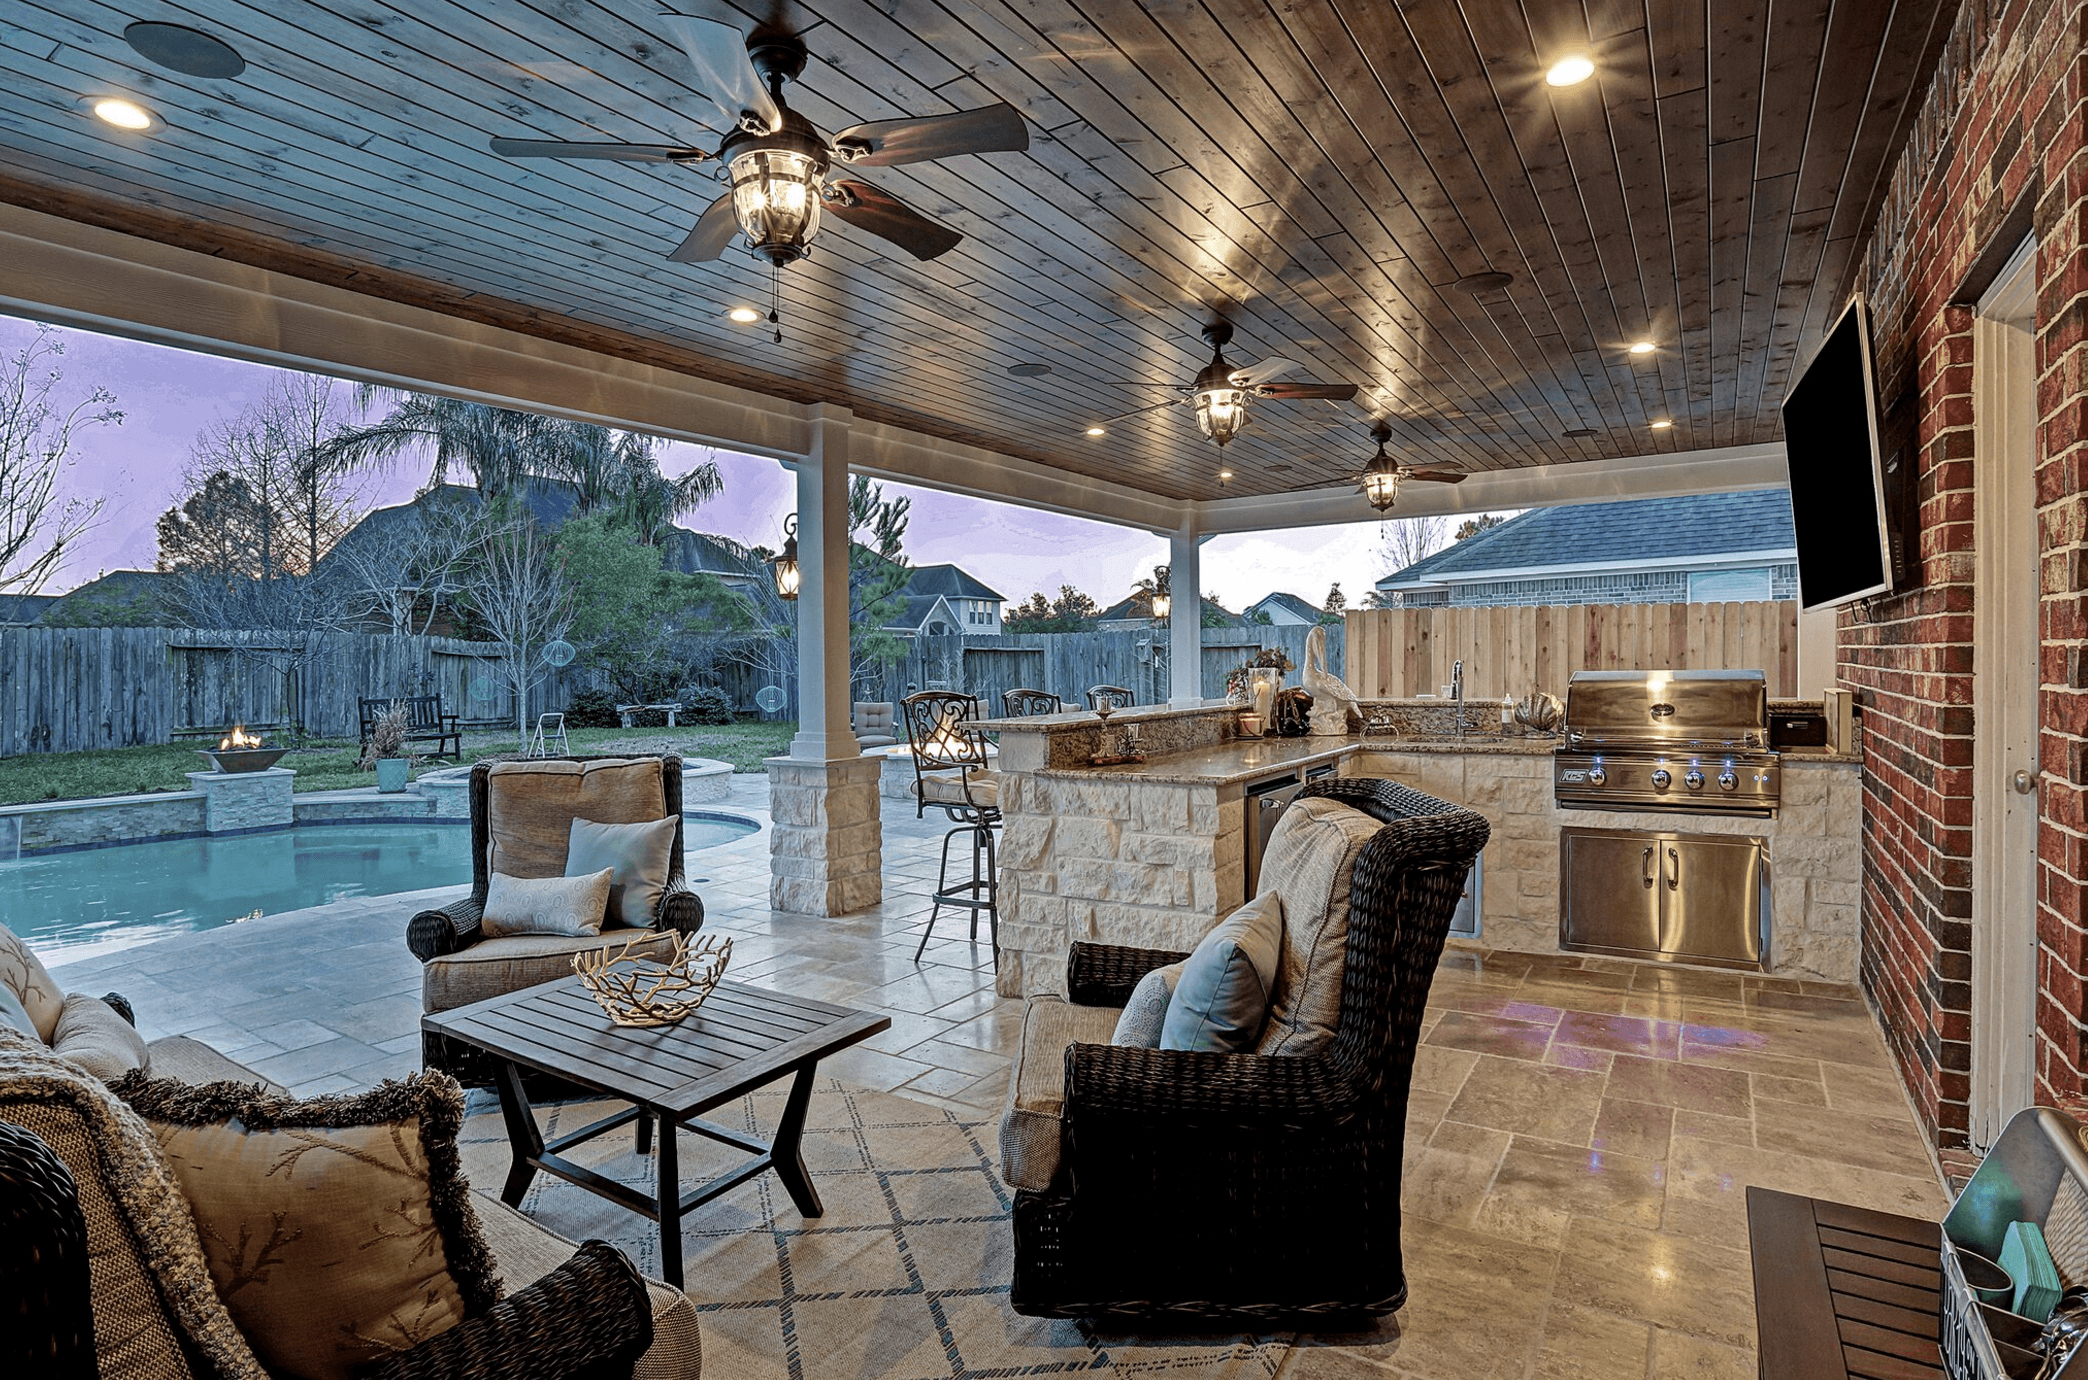 Build A Covered Patio Archives Texas Custom Patios intended for sizing 2088 X 1380